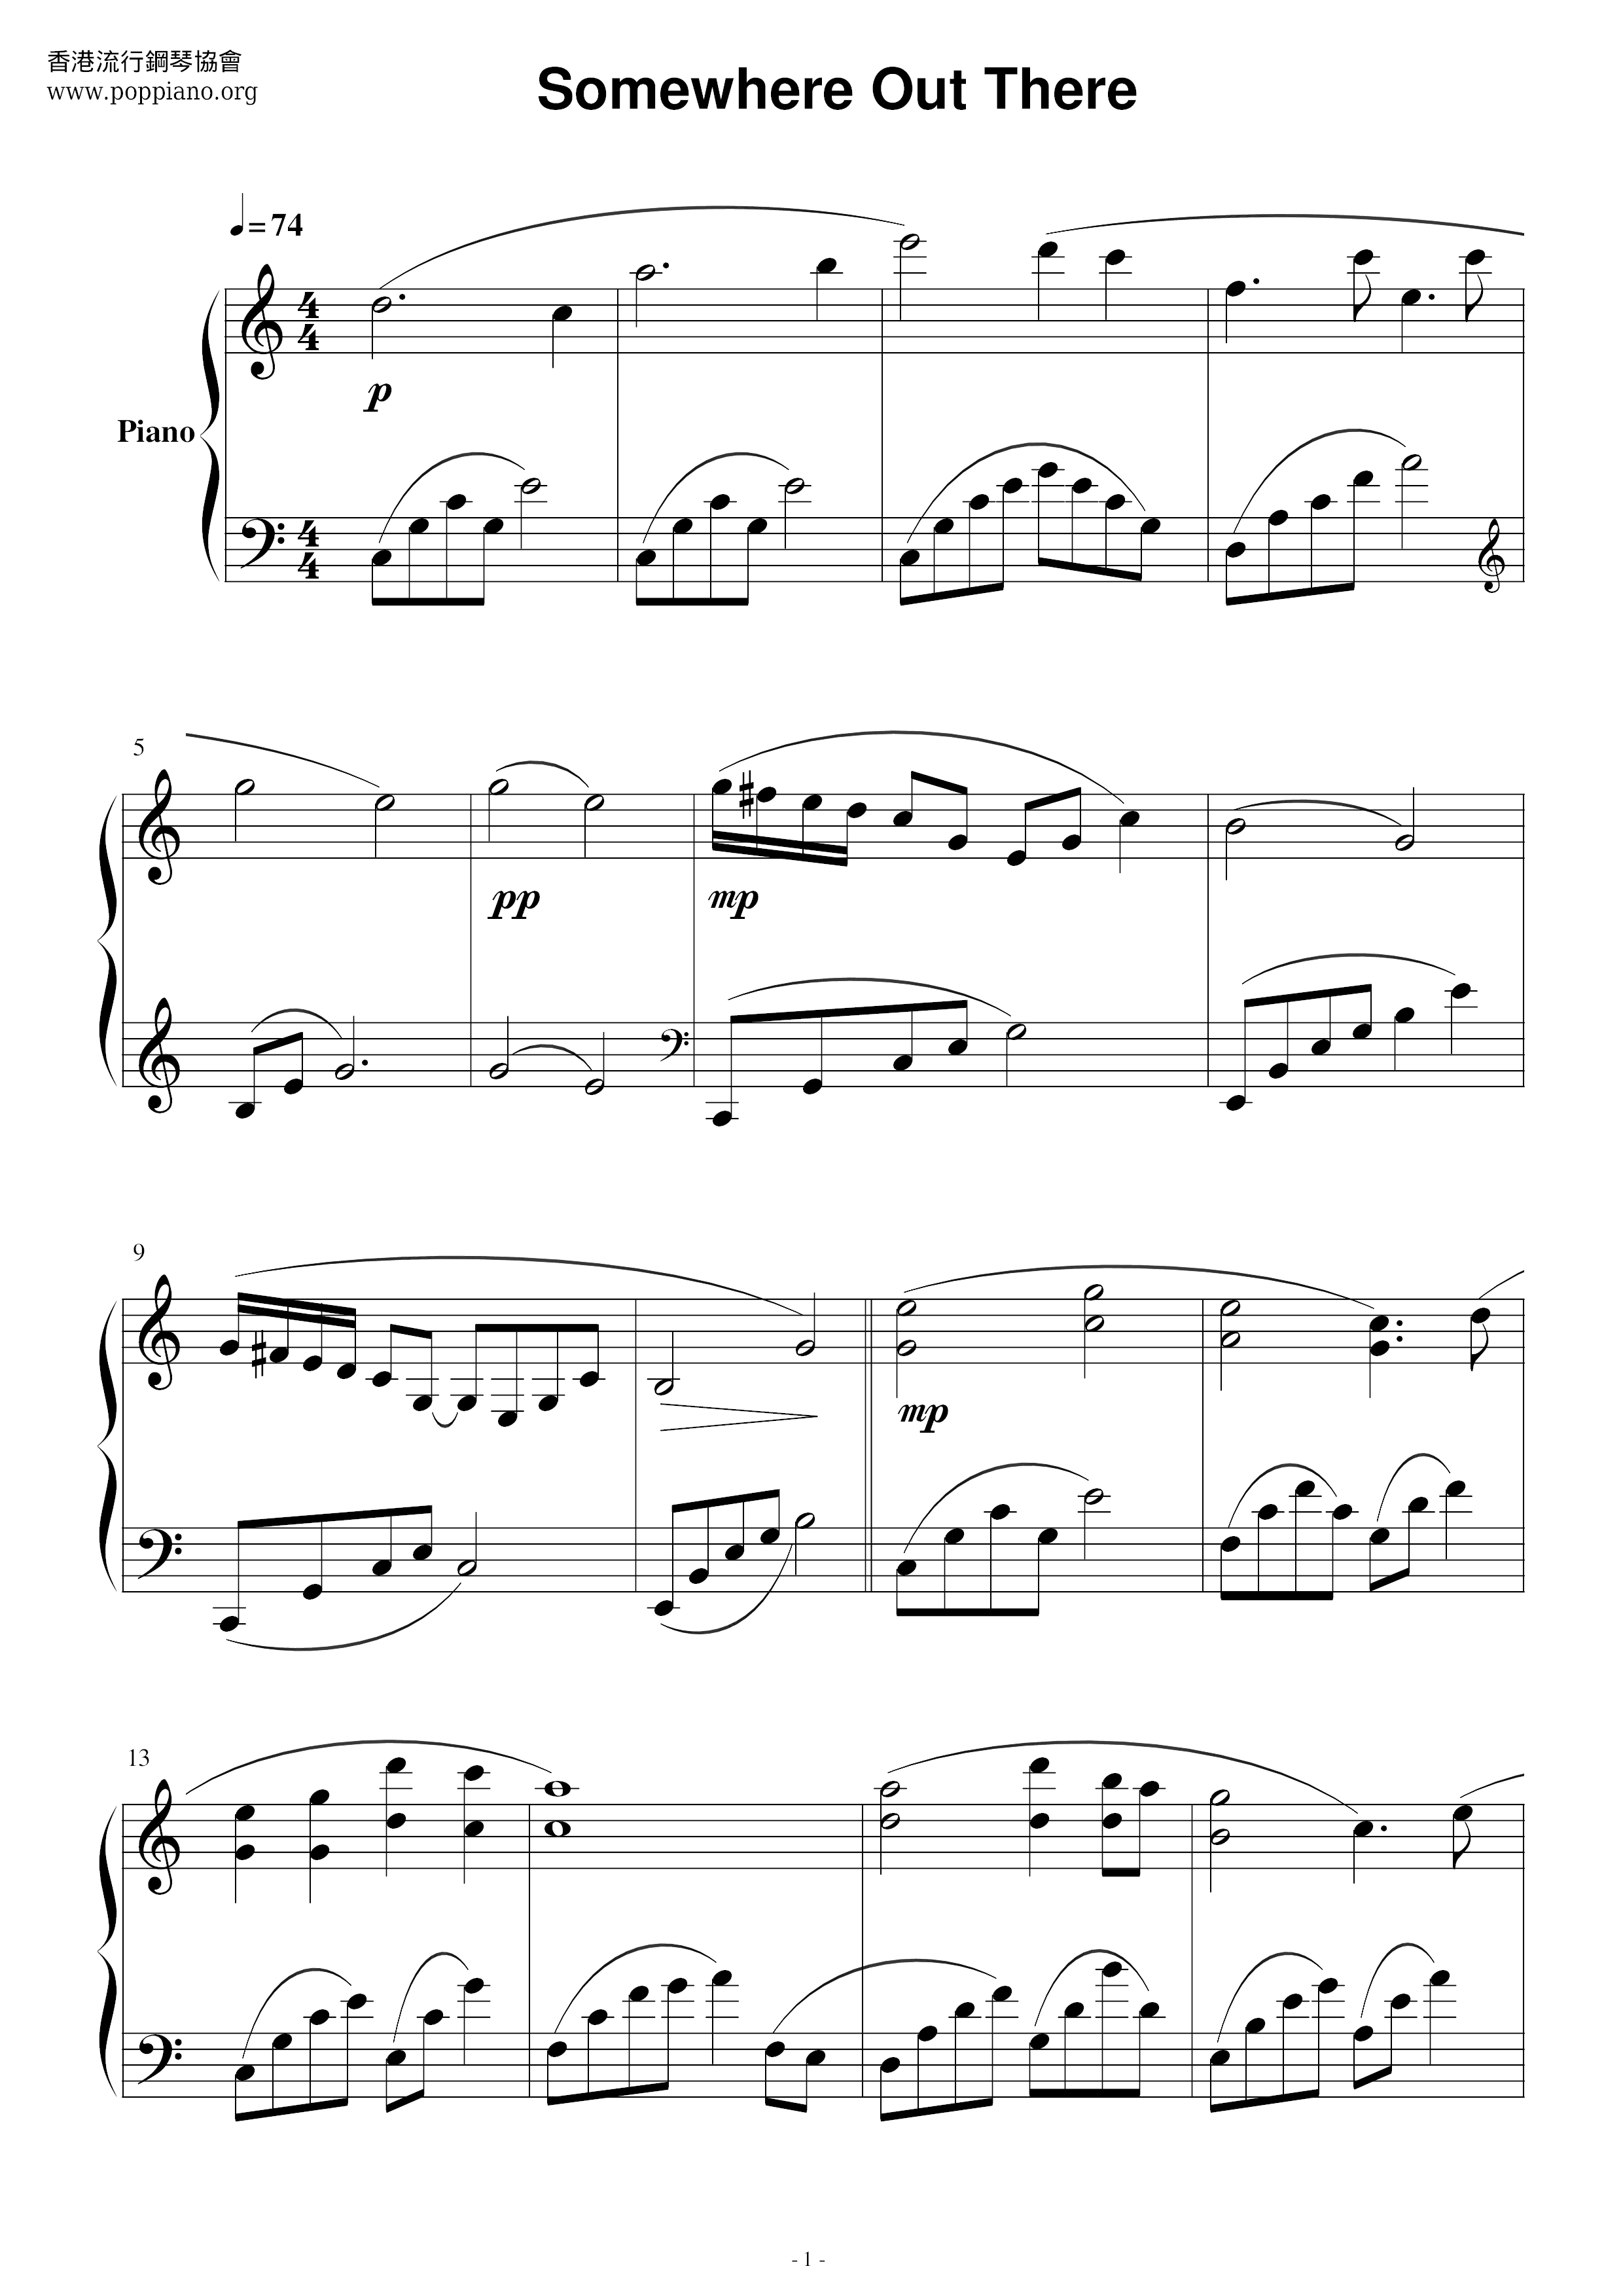 Somewhere Out There - From An American Tail Score